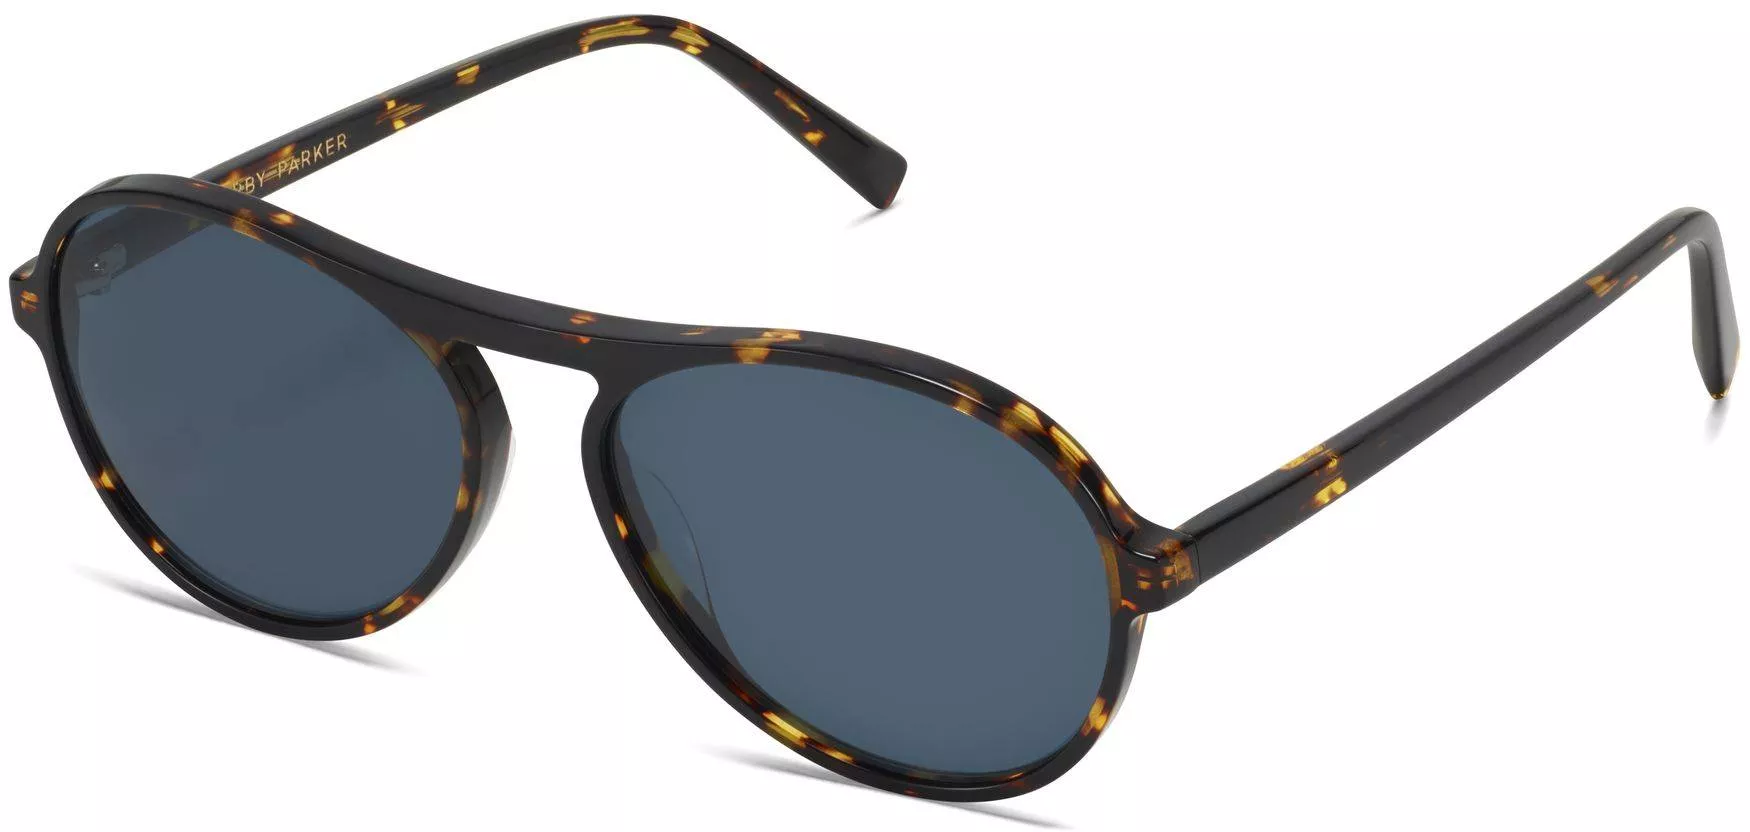 Angle View Image of Tallulah Sunglasses Collection, by Warby Parker Brand, in Burnt Honeycomb Tortoise Color